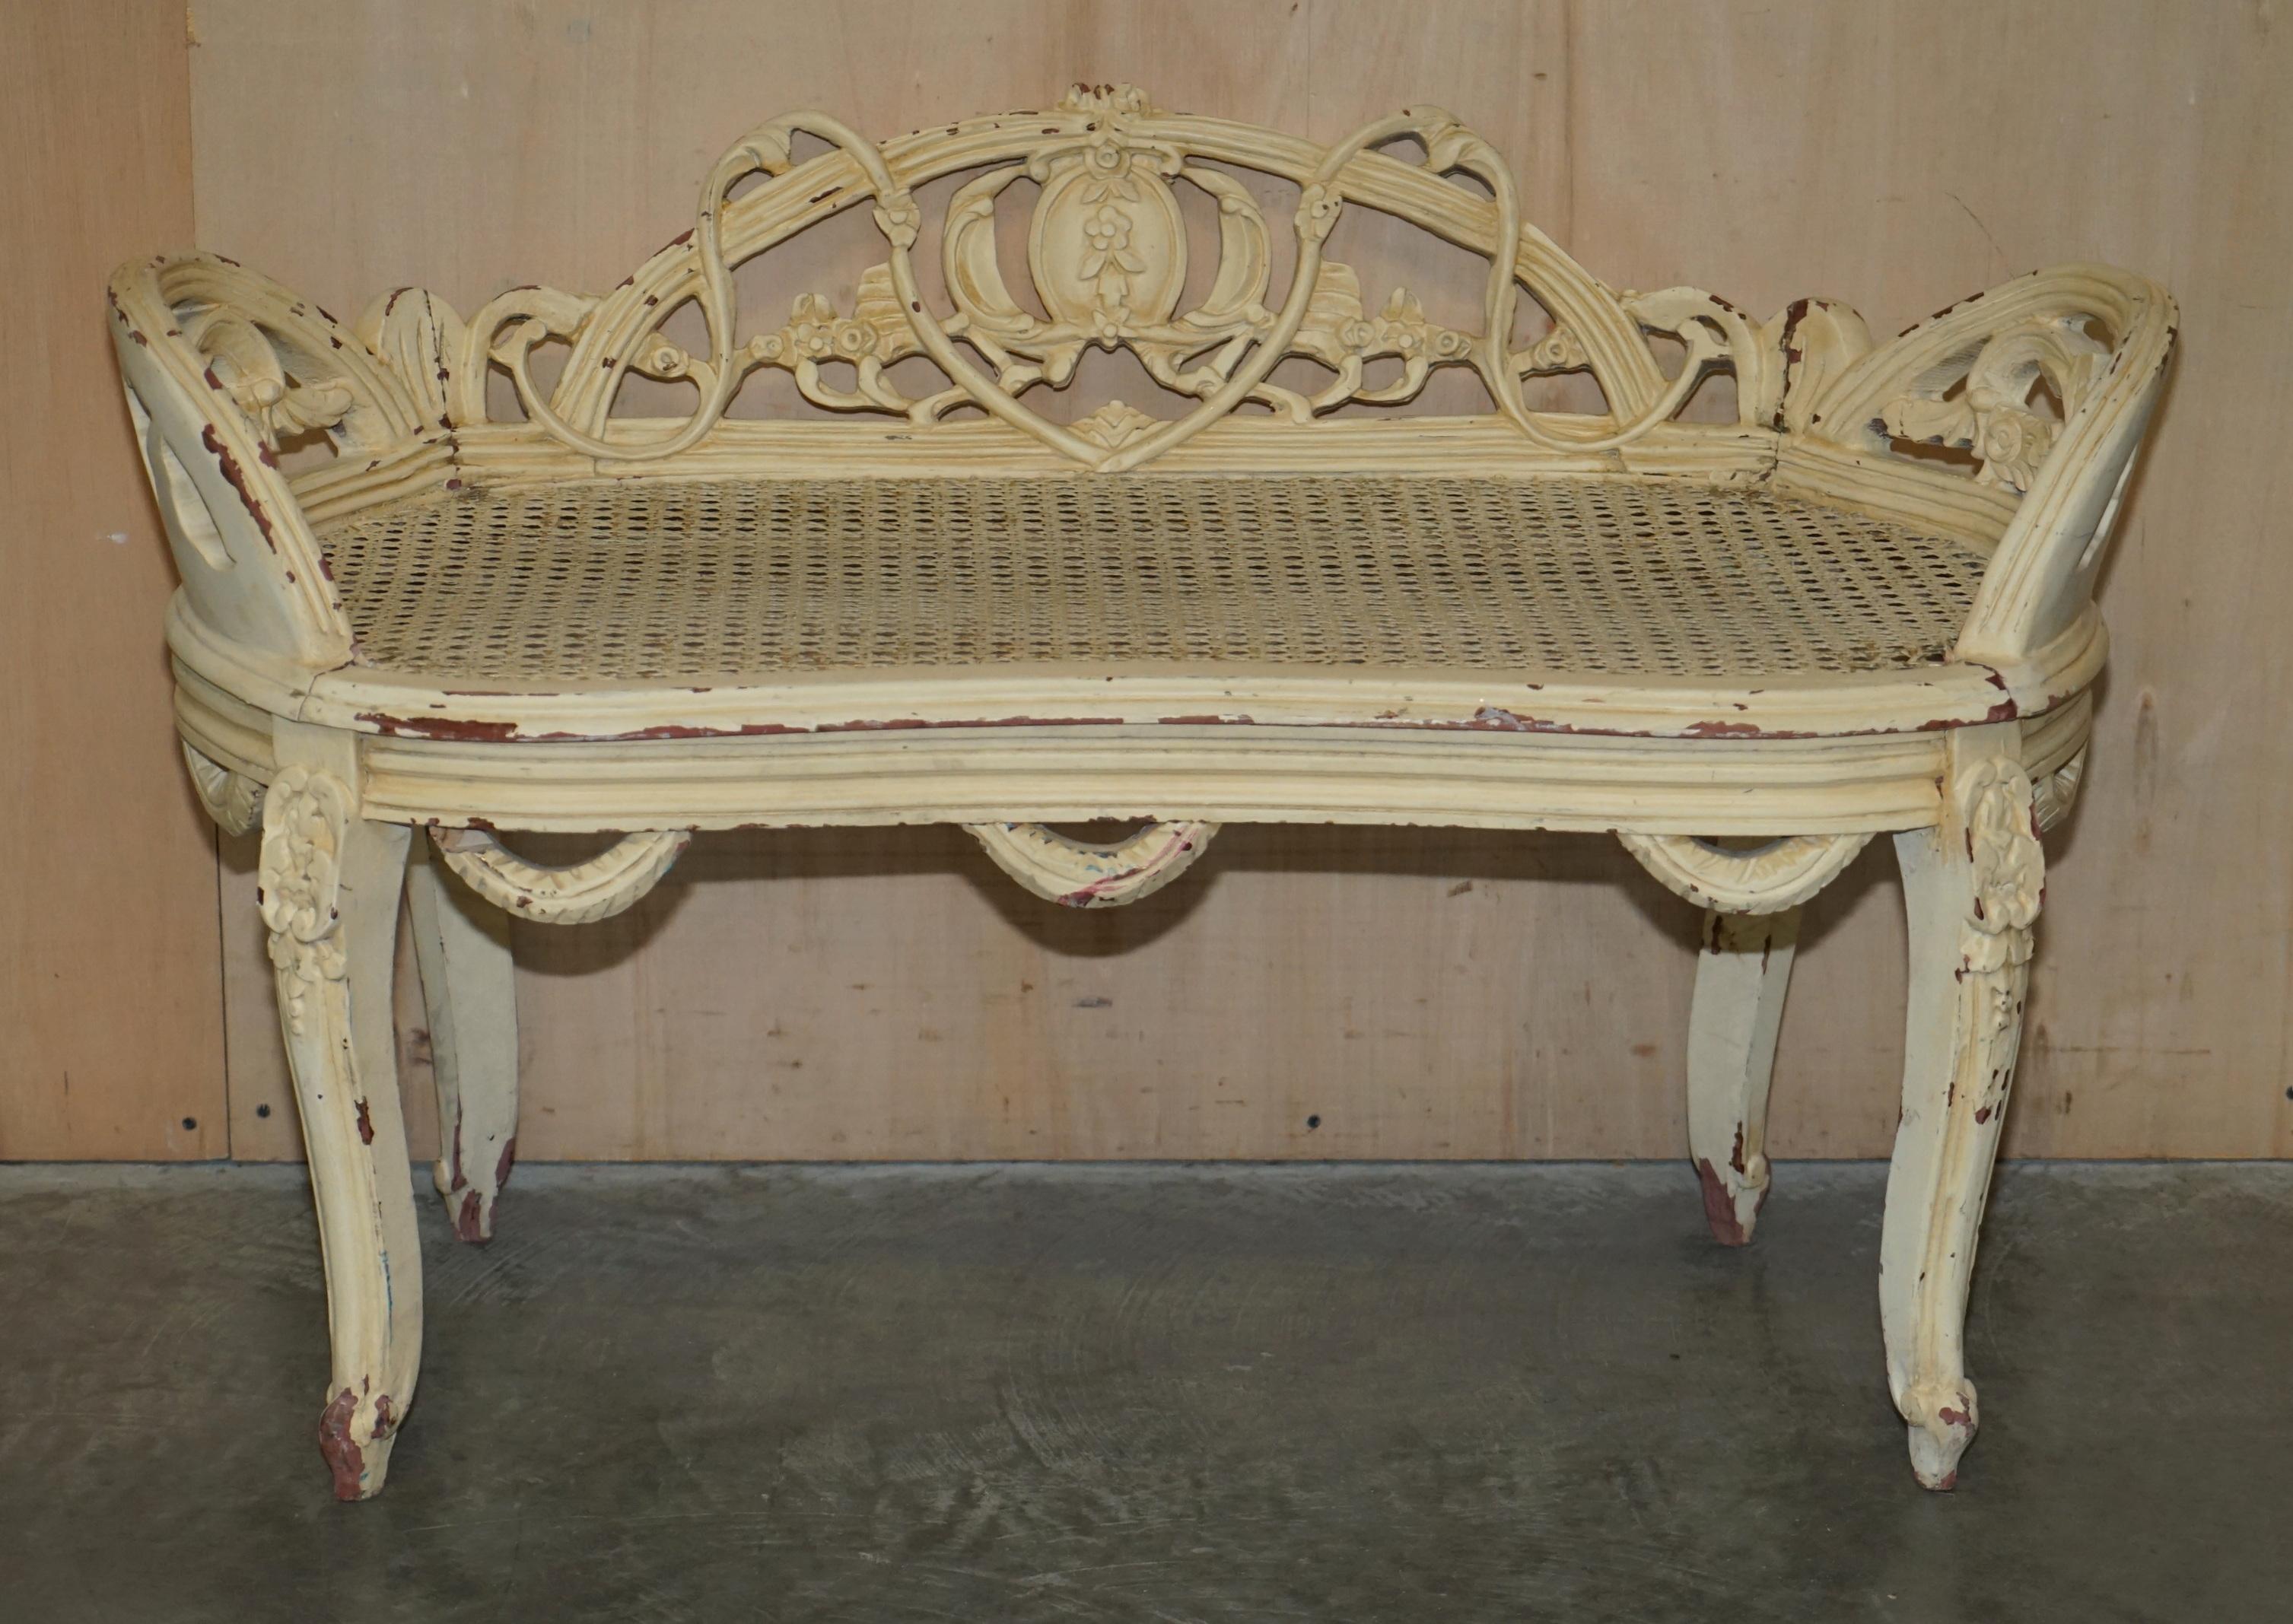 We are delighted to offer for sale this stunning original circa 1880 Napoleon III Louis XVI style bergère window seat bench with original shabby chic paint 

This is a truly stunning piece, very comfortable ornately carved all over and with the